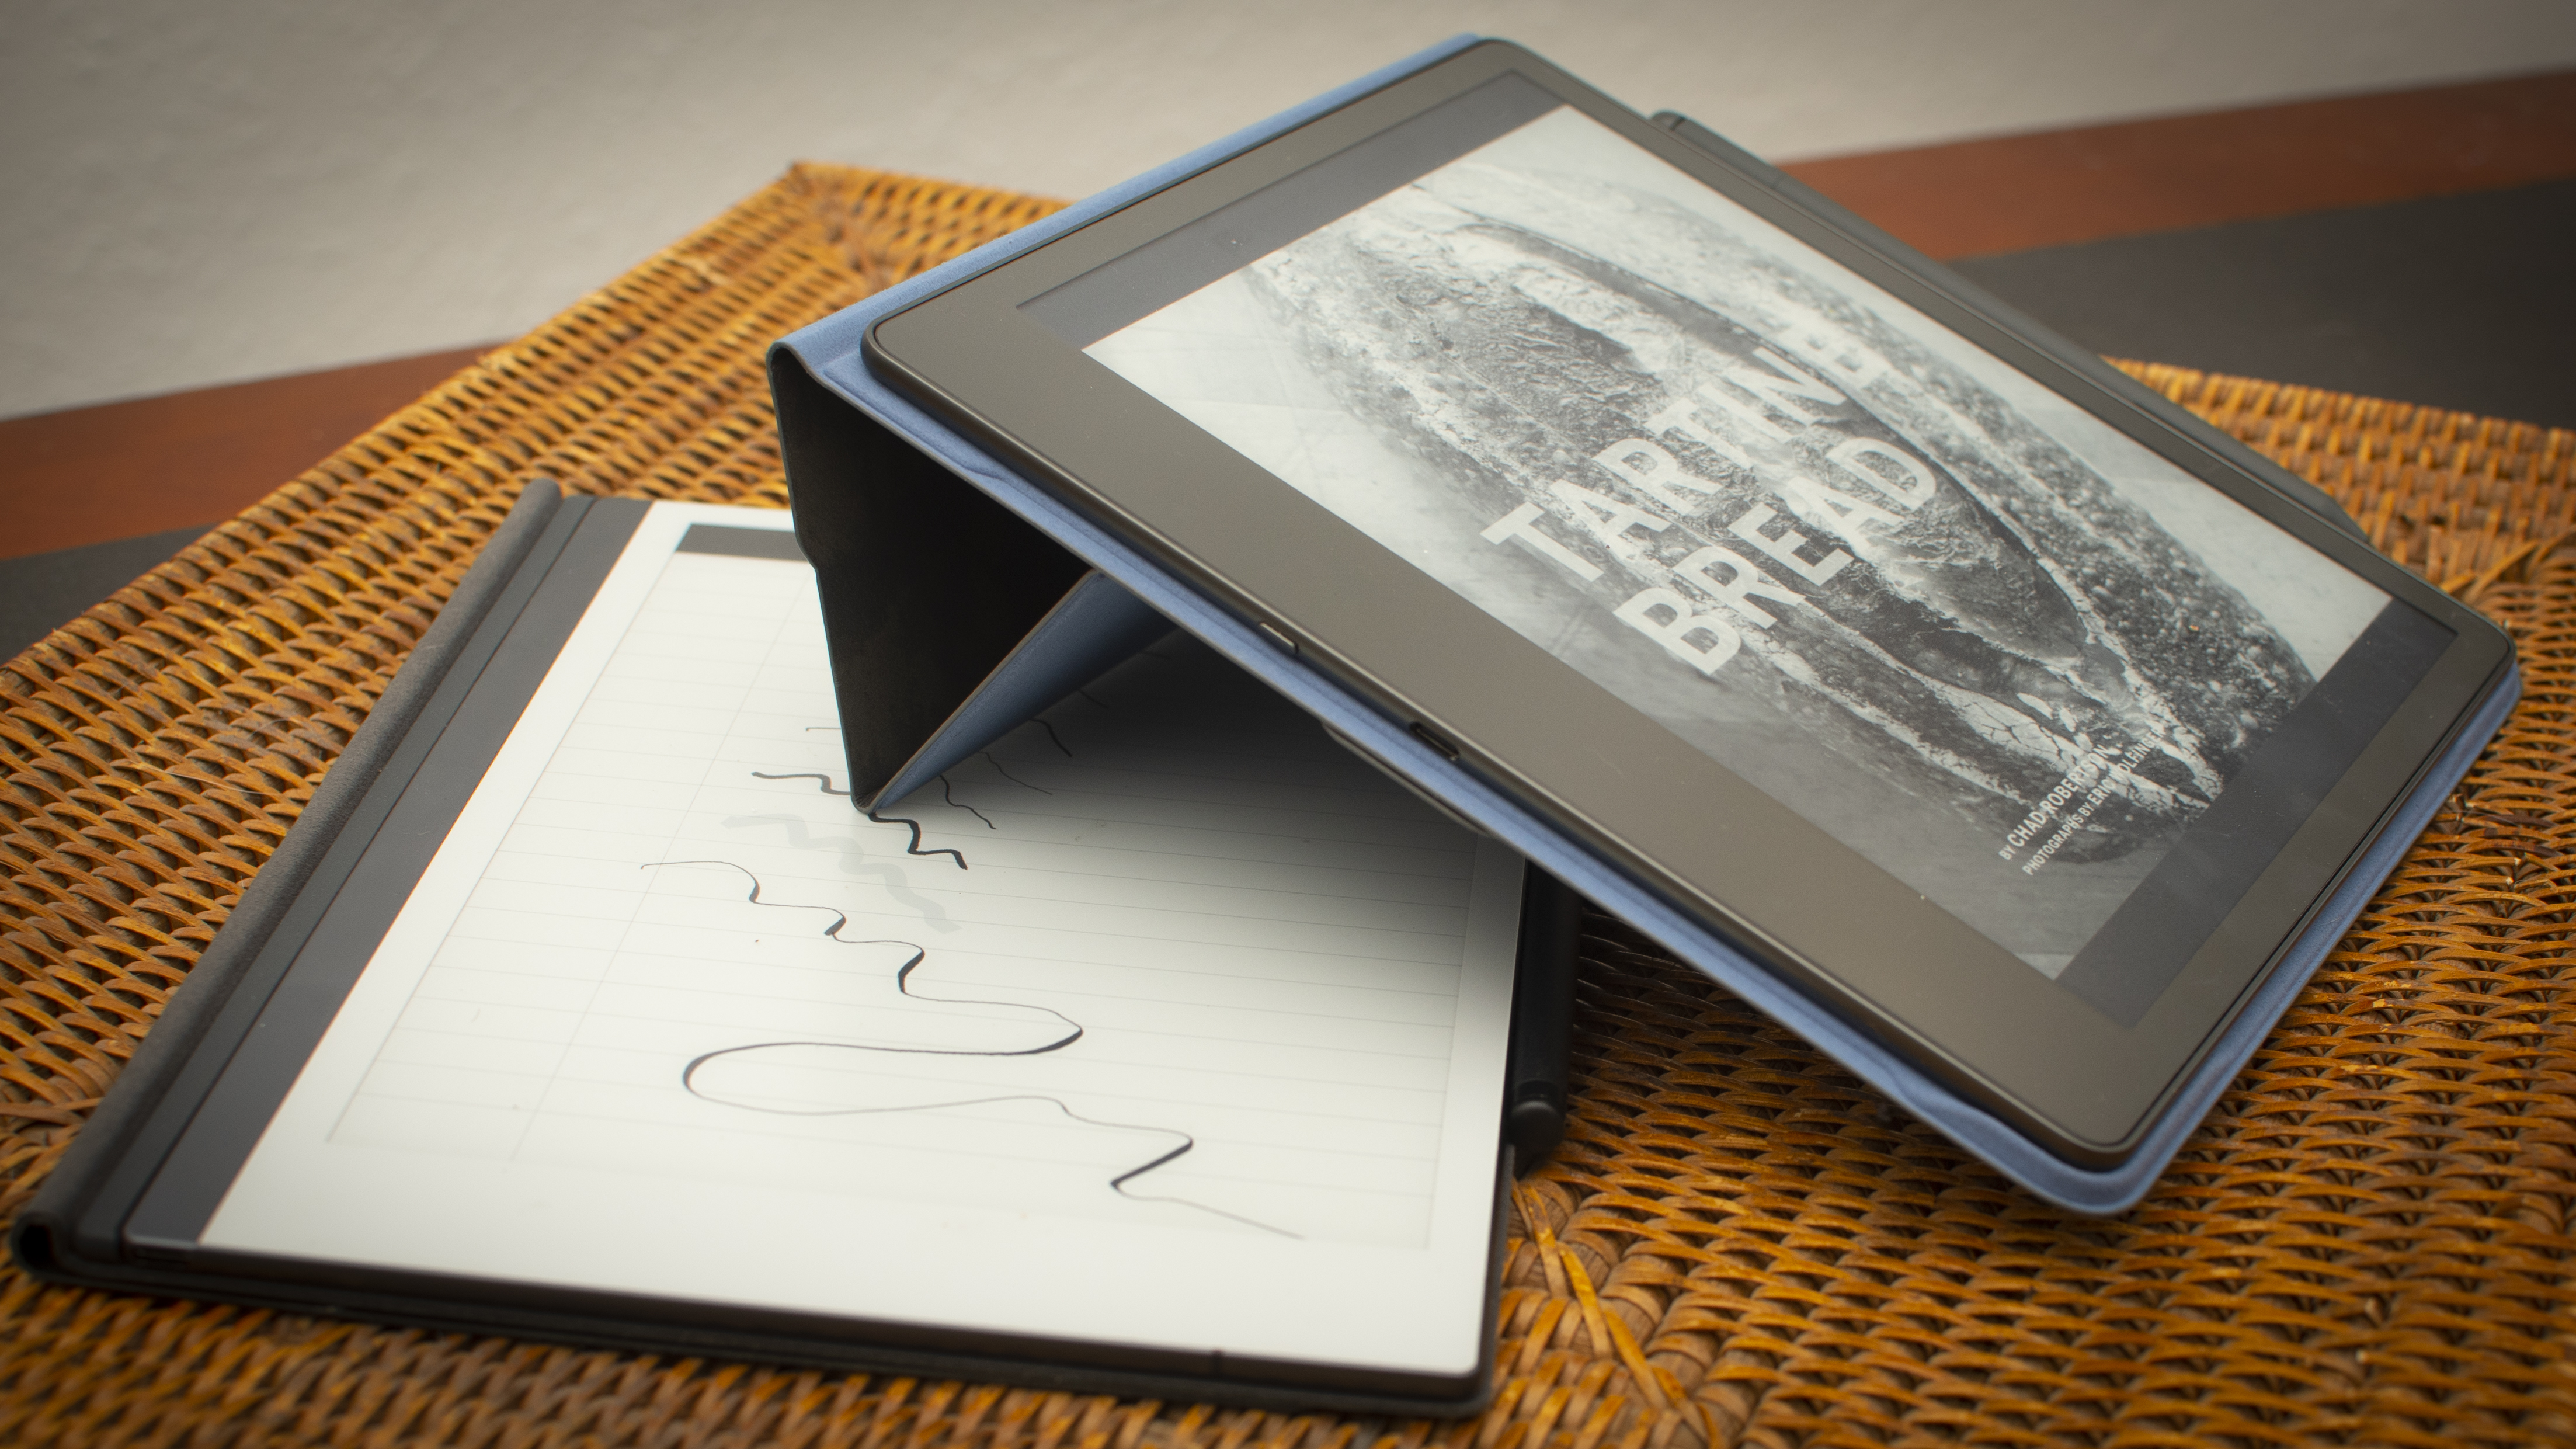 Has my opinion on the Kindle Scribe changed? (6 Month Review) 